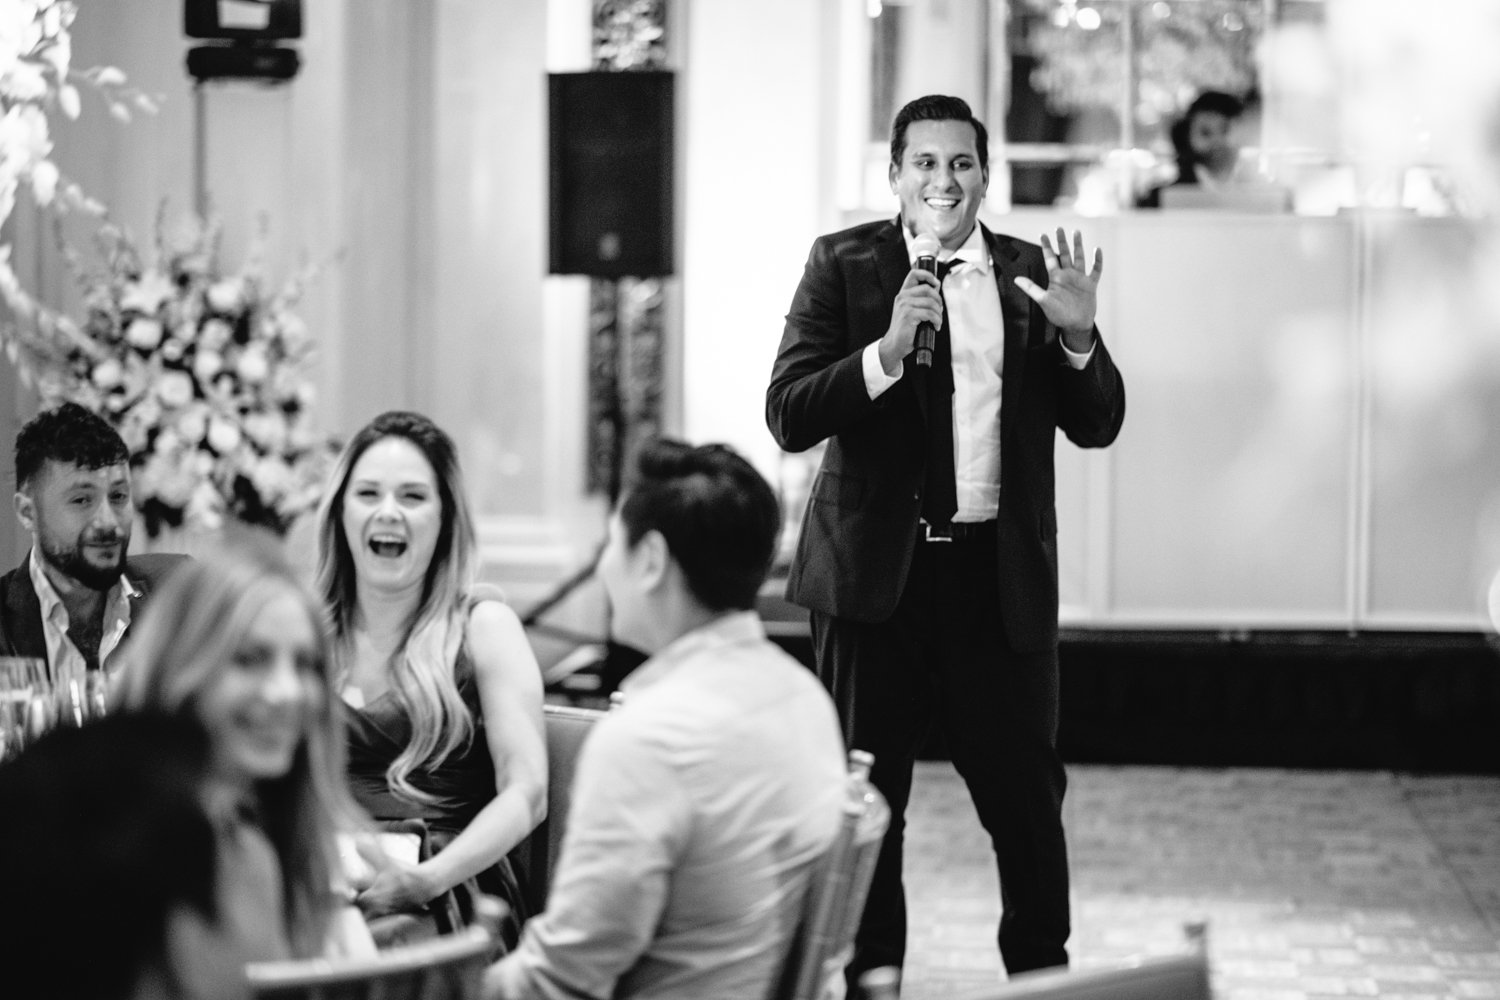 Best man is standing and smiling with a microphone in his hand and wedding guests seated at their table in the foreground are smiling and laughing.

Manhattan Luxury Wedding. New York Luxury Wedding Photographer. Wedding in Manhattan. NYC Luxury Wedding.